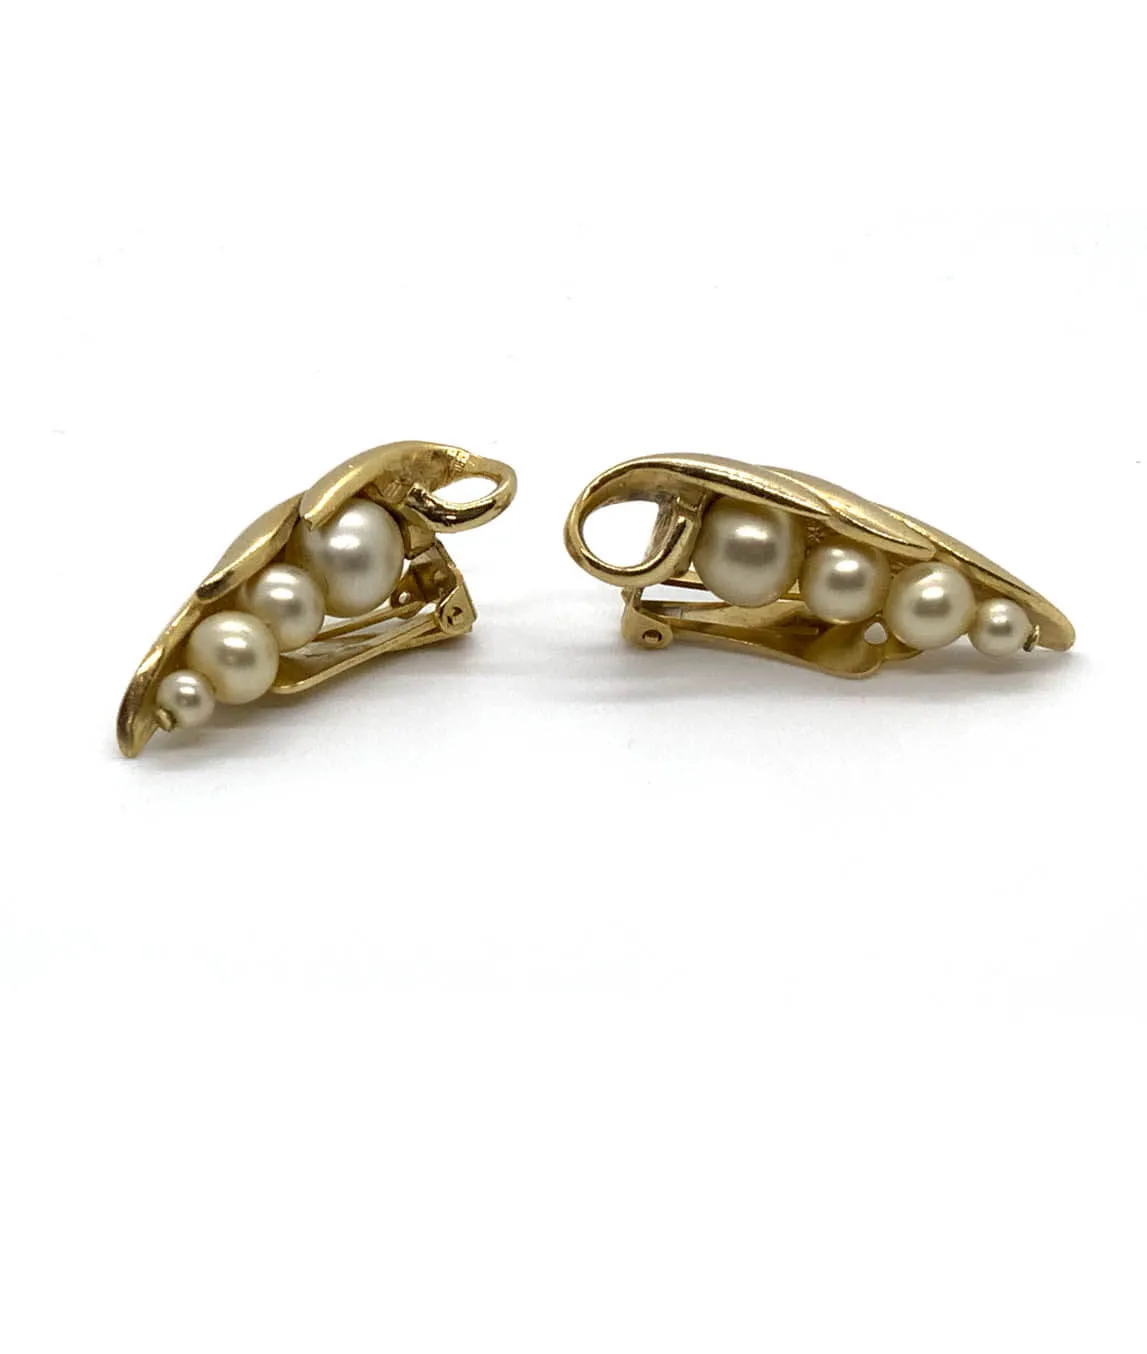 Gold plated and faux pearl pea pod shaped earrings by Ledo